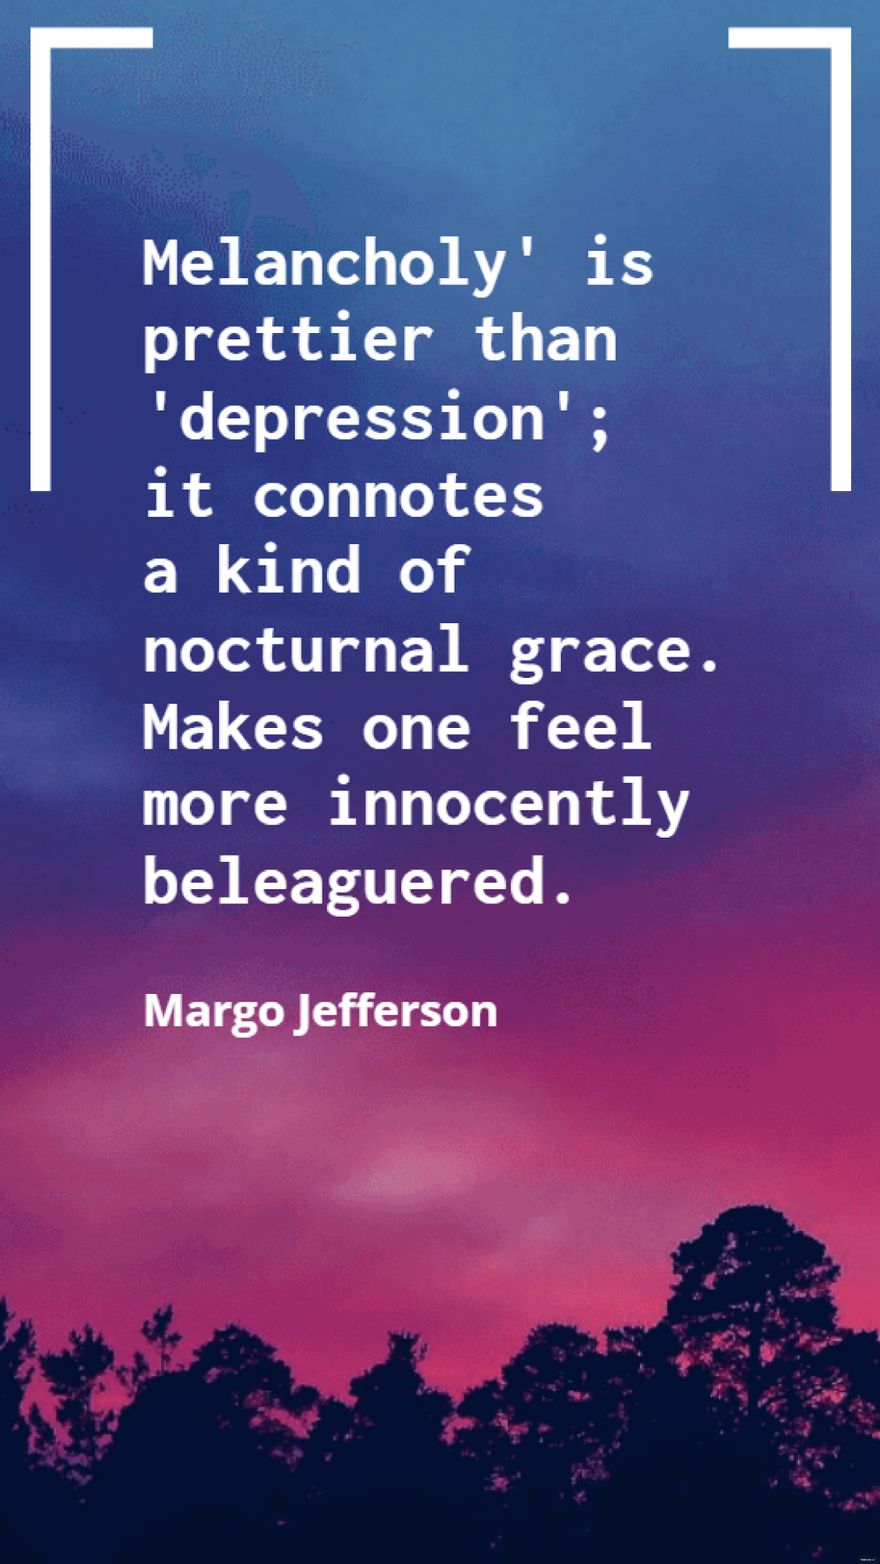 Margo Jefferson  Melancholy is prettier than depression it connotes a kind of nocturnal grace Makes one feel more innocently beleaguered